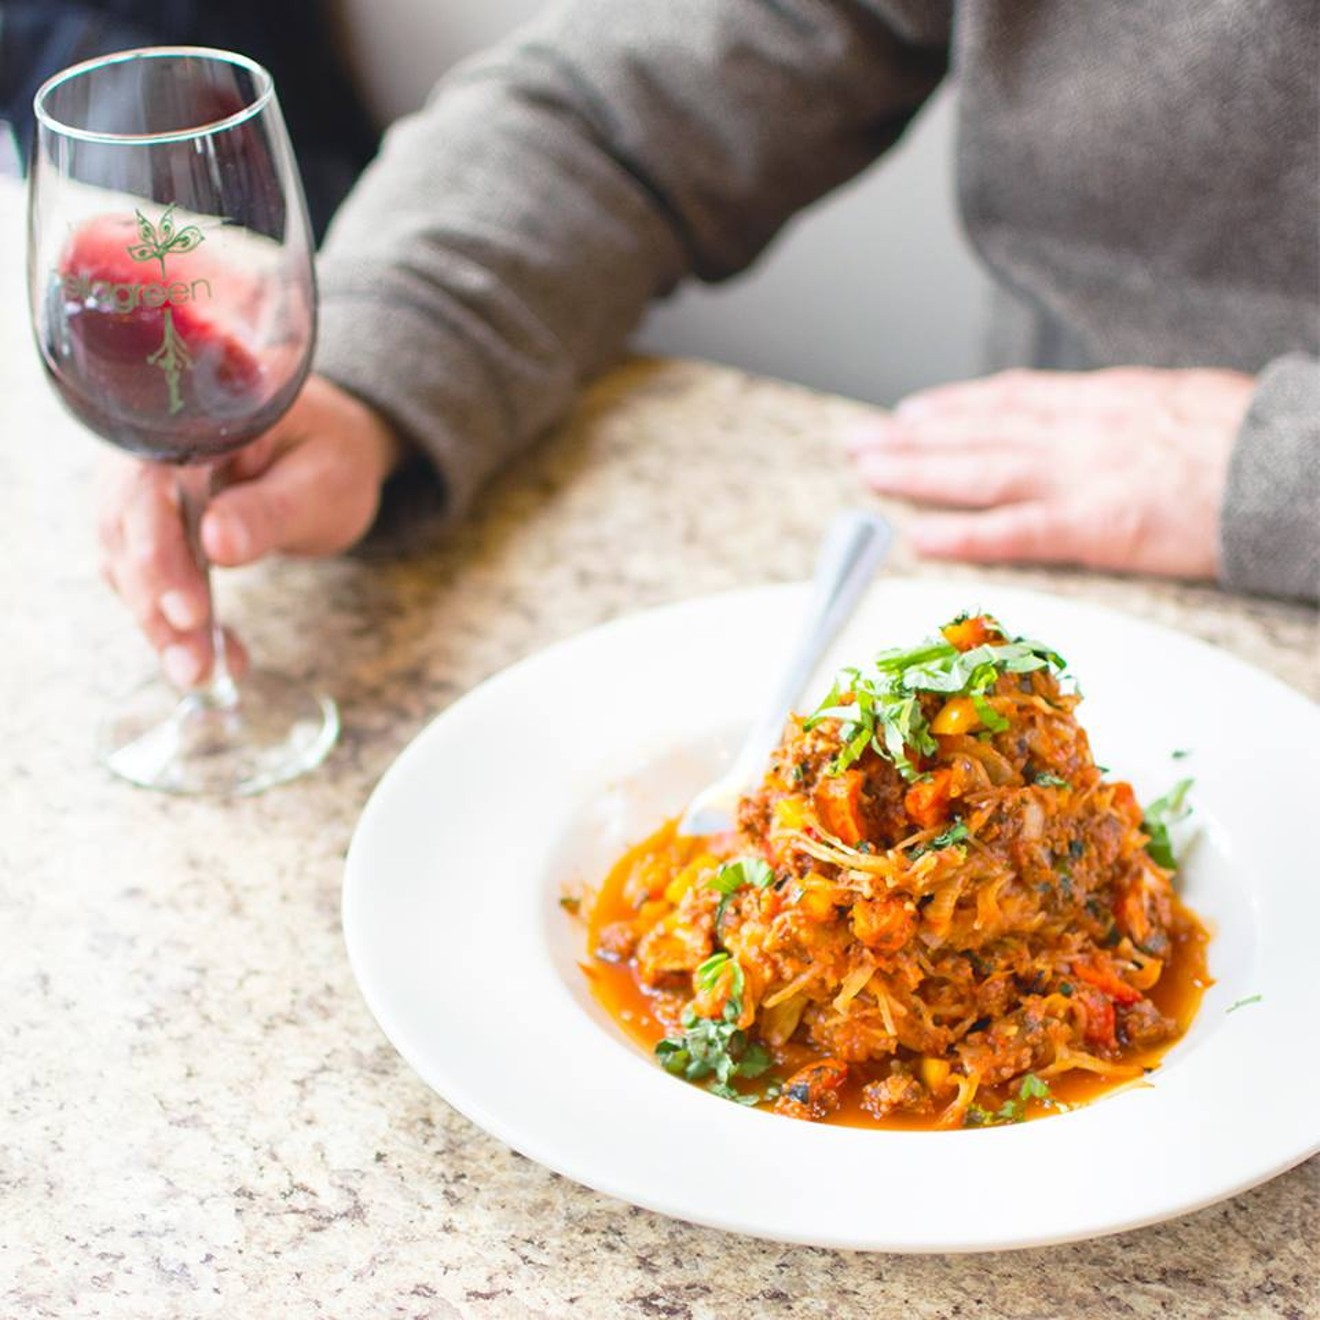 Spaghetti squash Bolognese at the new Bellagreen at the Shops at Legacy.